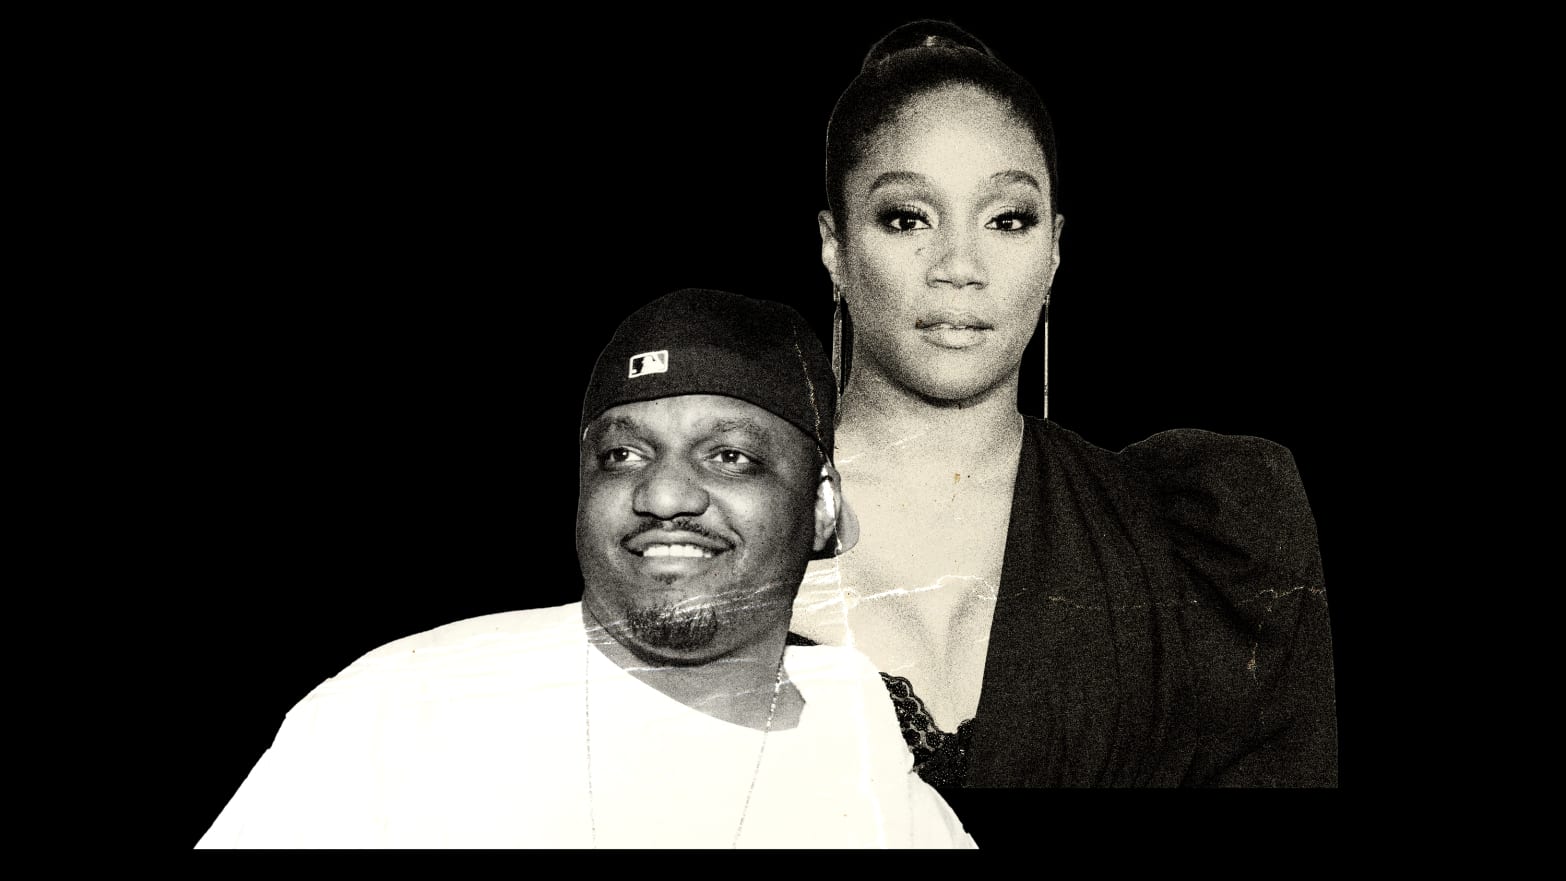 illustration featuring Tiffany Haddish and Aries Spears